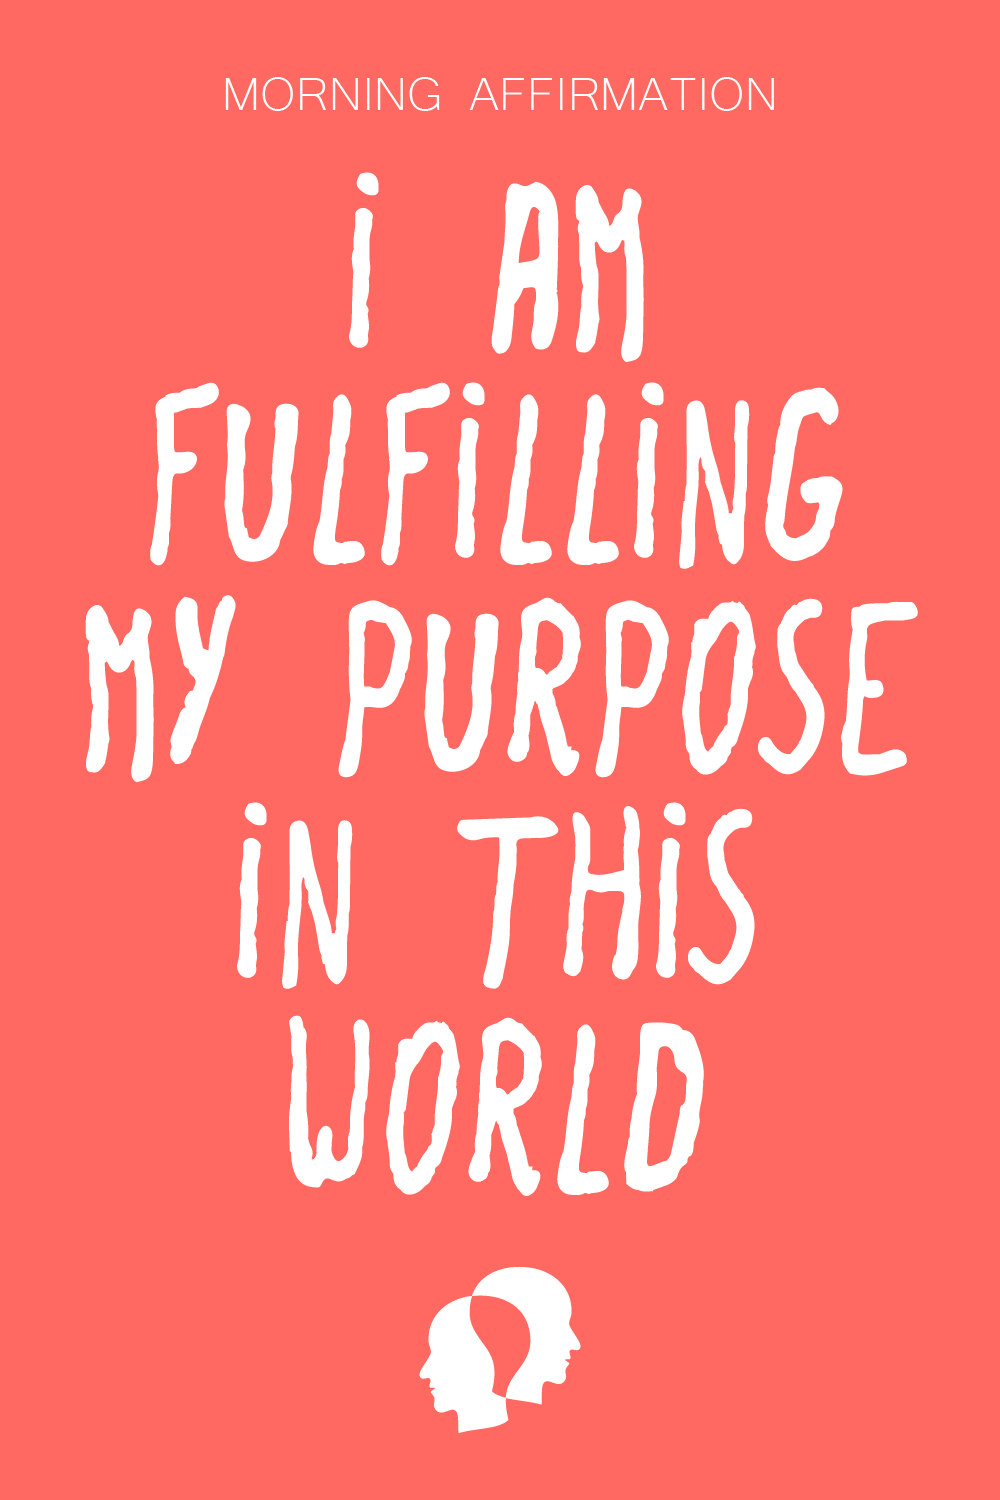 I AM FULFILLING MY PURPOSE IN THIS WORLD Affirm! :D Law Of Attraction Affirmations Wallpap. Affirmations, Law of attraction affirmations, Spiritual quotes